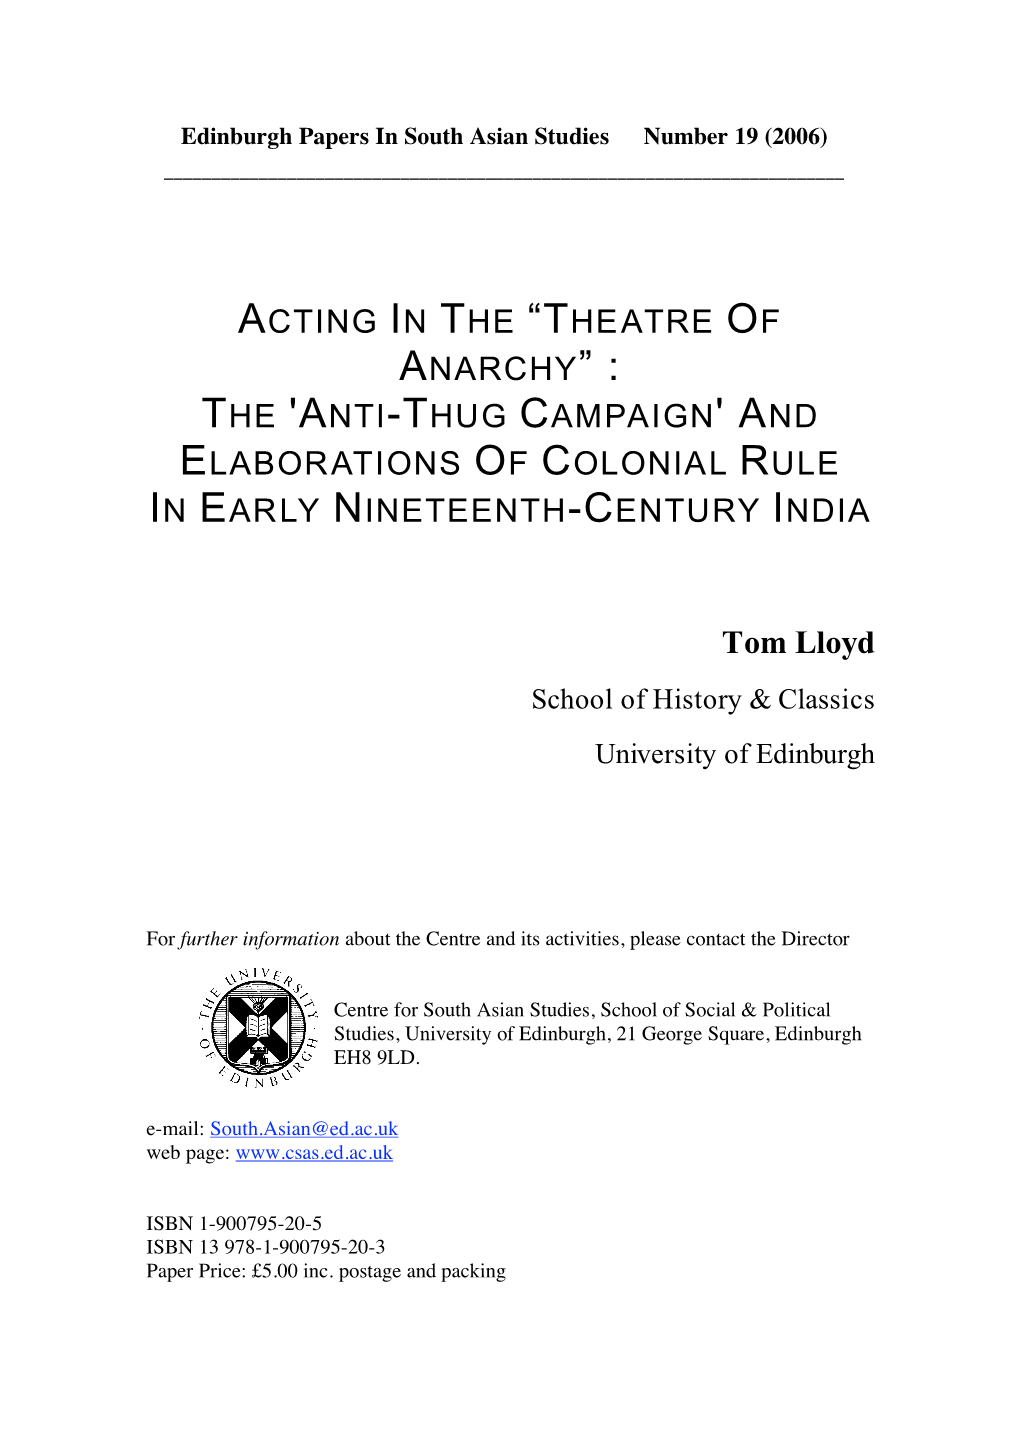 Anti-Thug Campaign' and Elaborations of Colonial Rule in Early Nineteenth-Century India